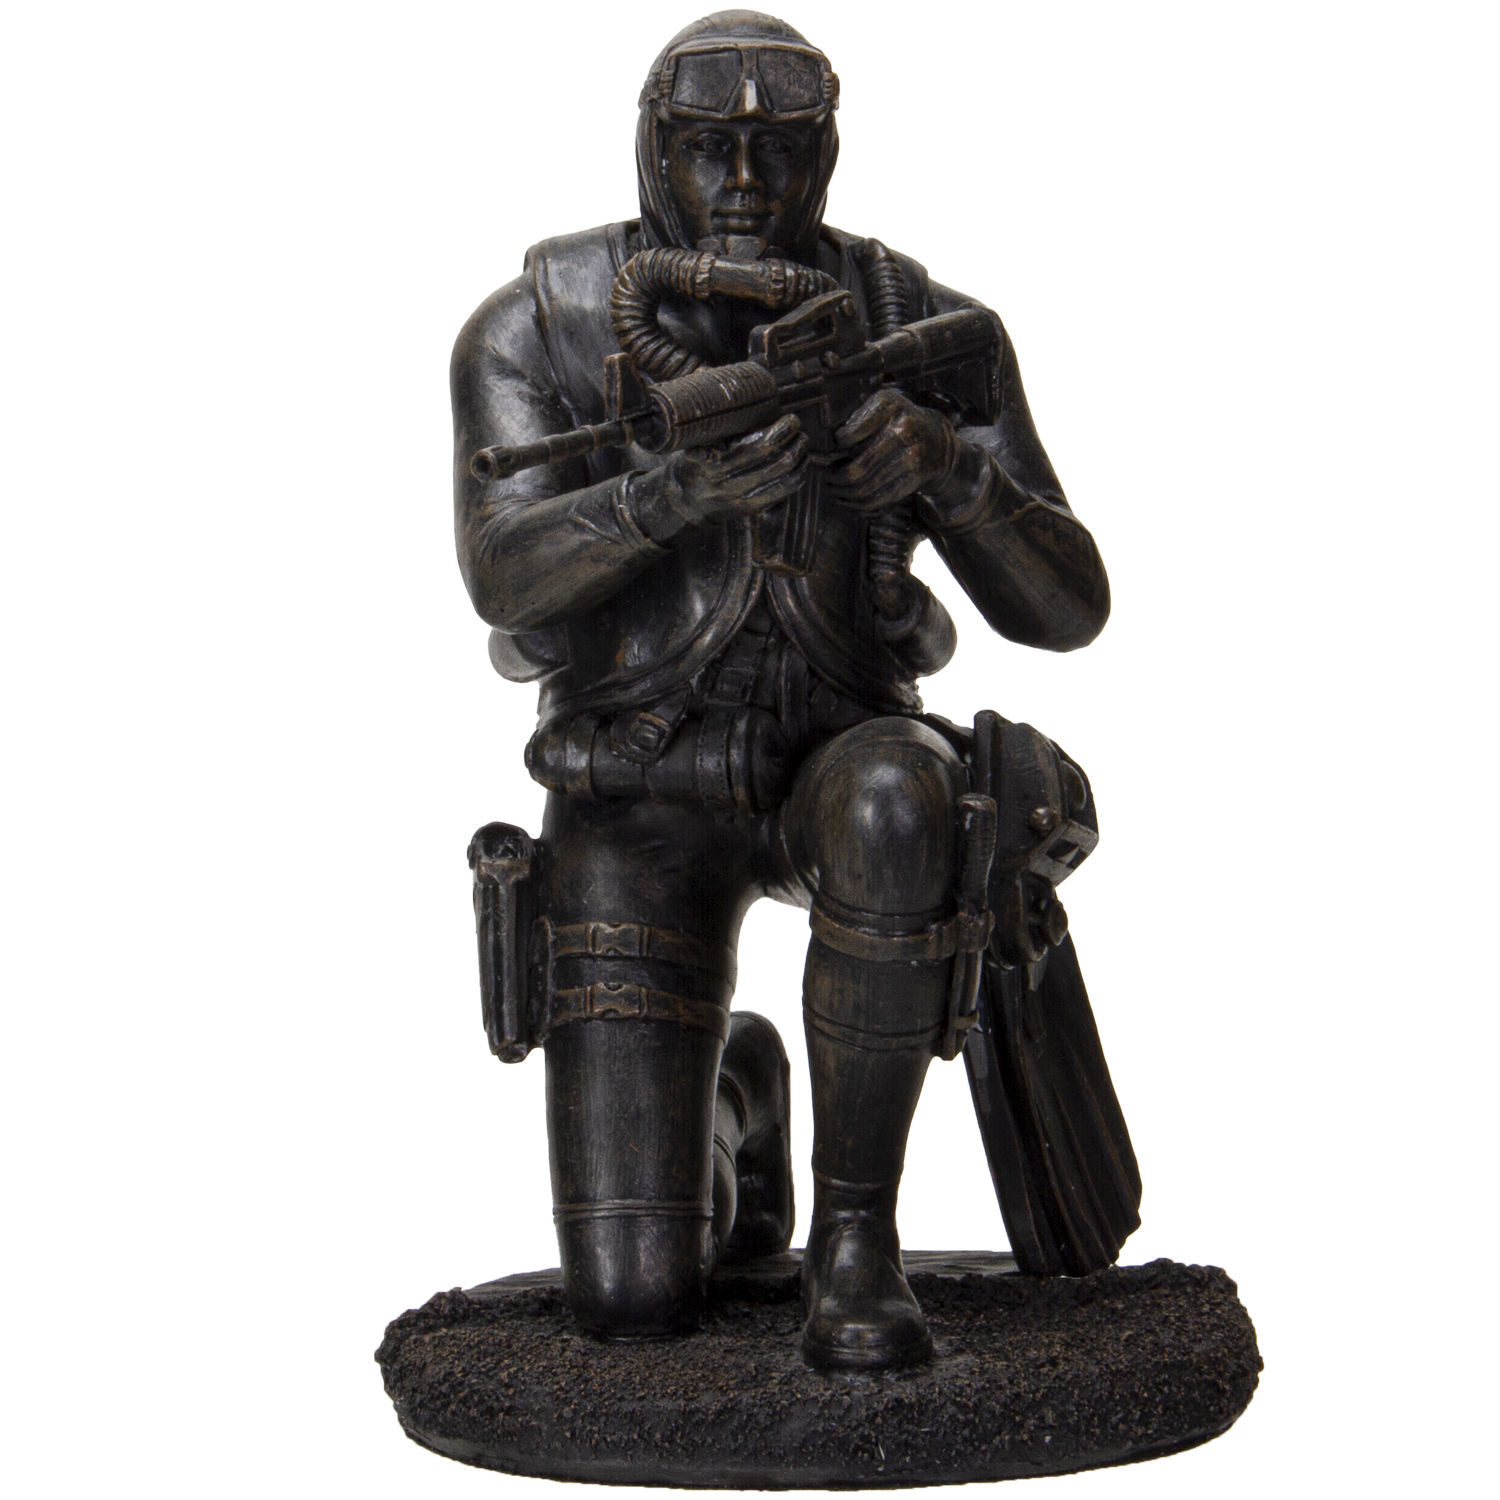 Pacific Giftware America's Finest Brave Soldier Checking Surrounding Military Heroes Collectible Figurine